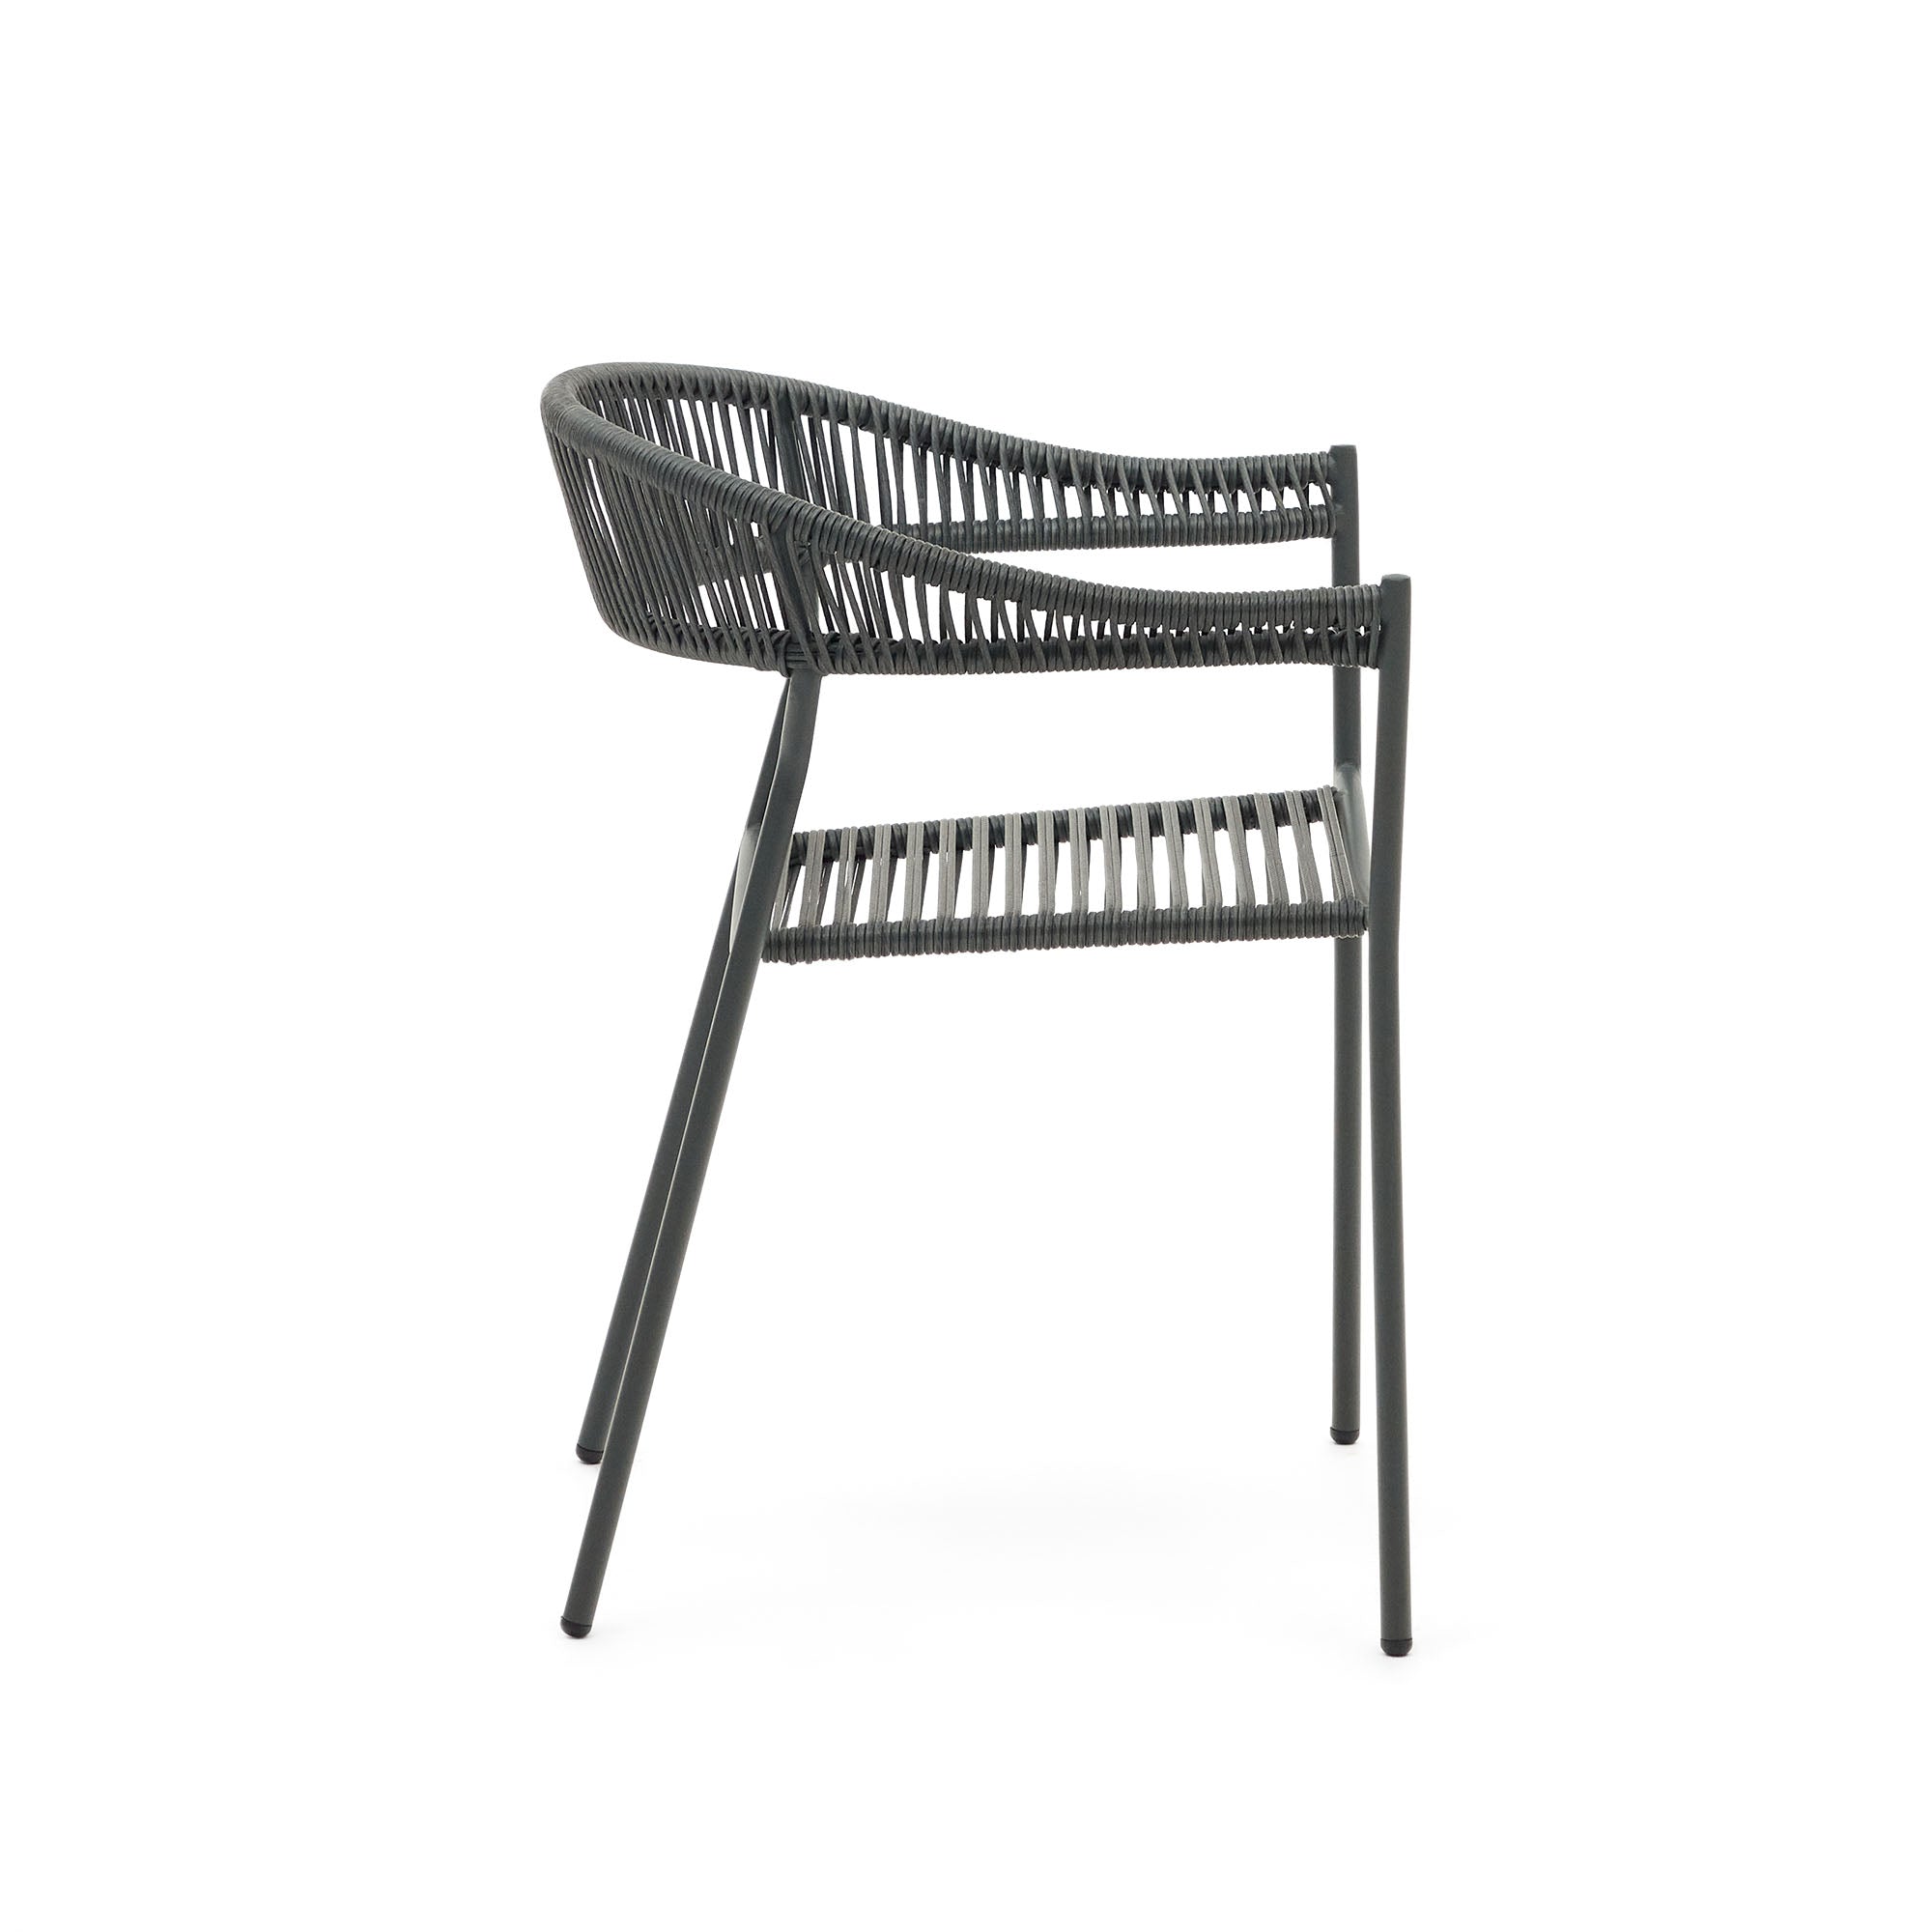 Futadera stackable outdoor chair in grey synthetic cord and grey painted steel